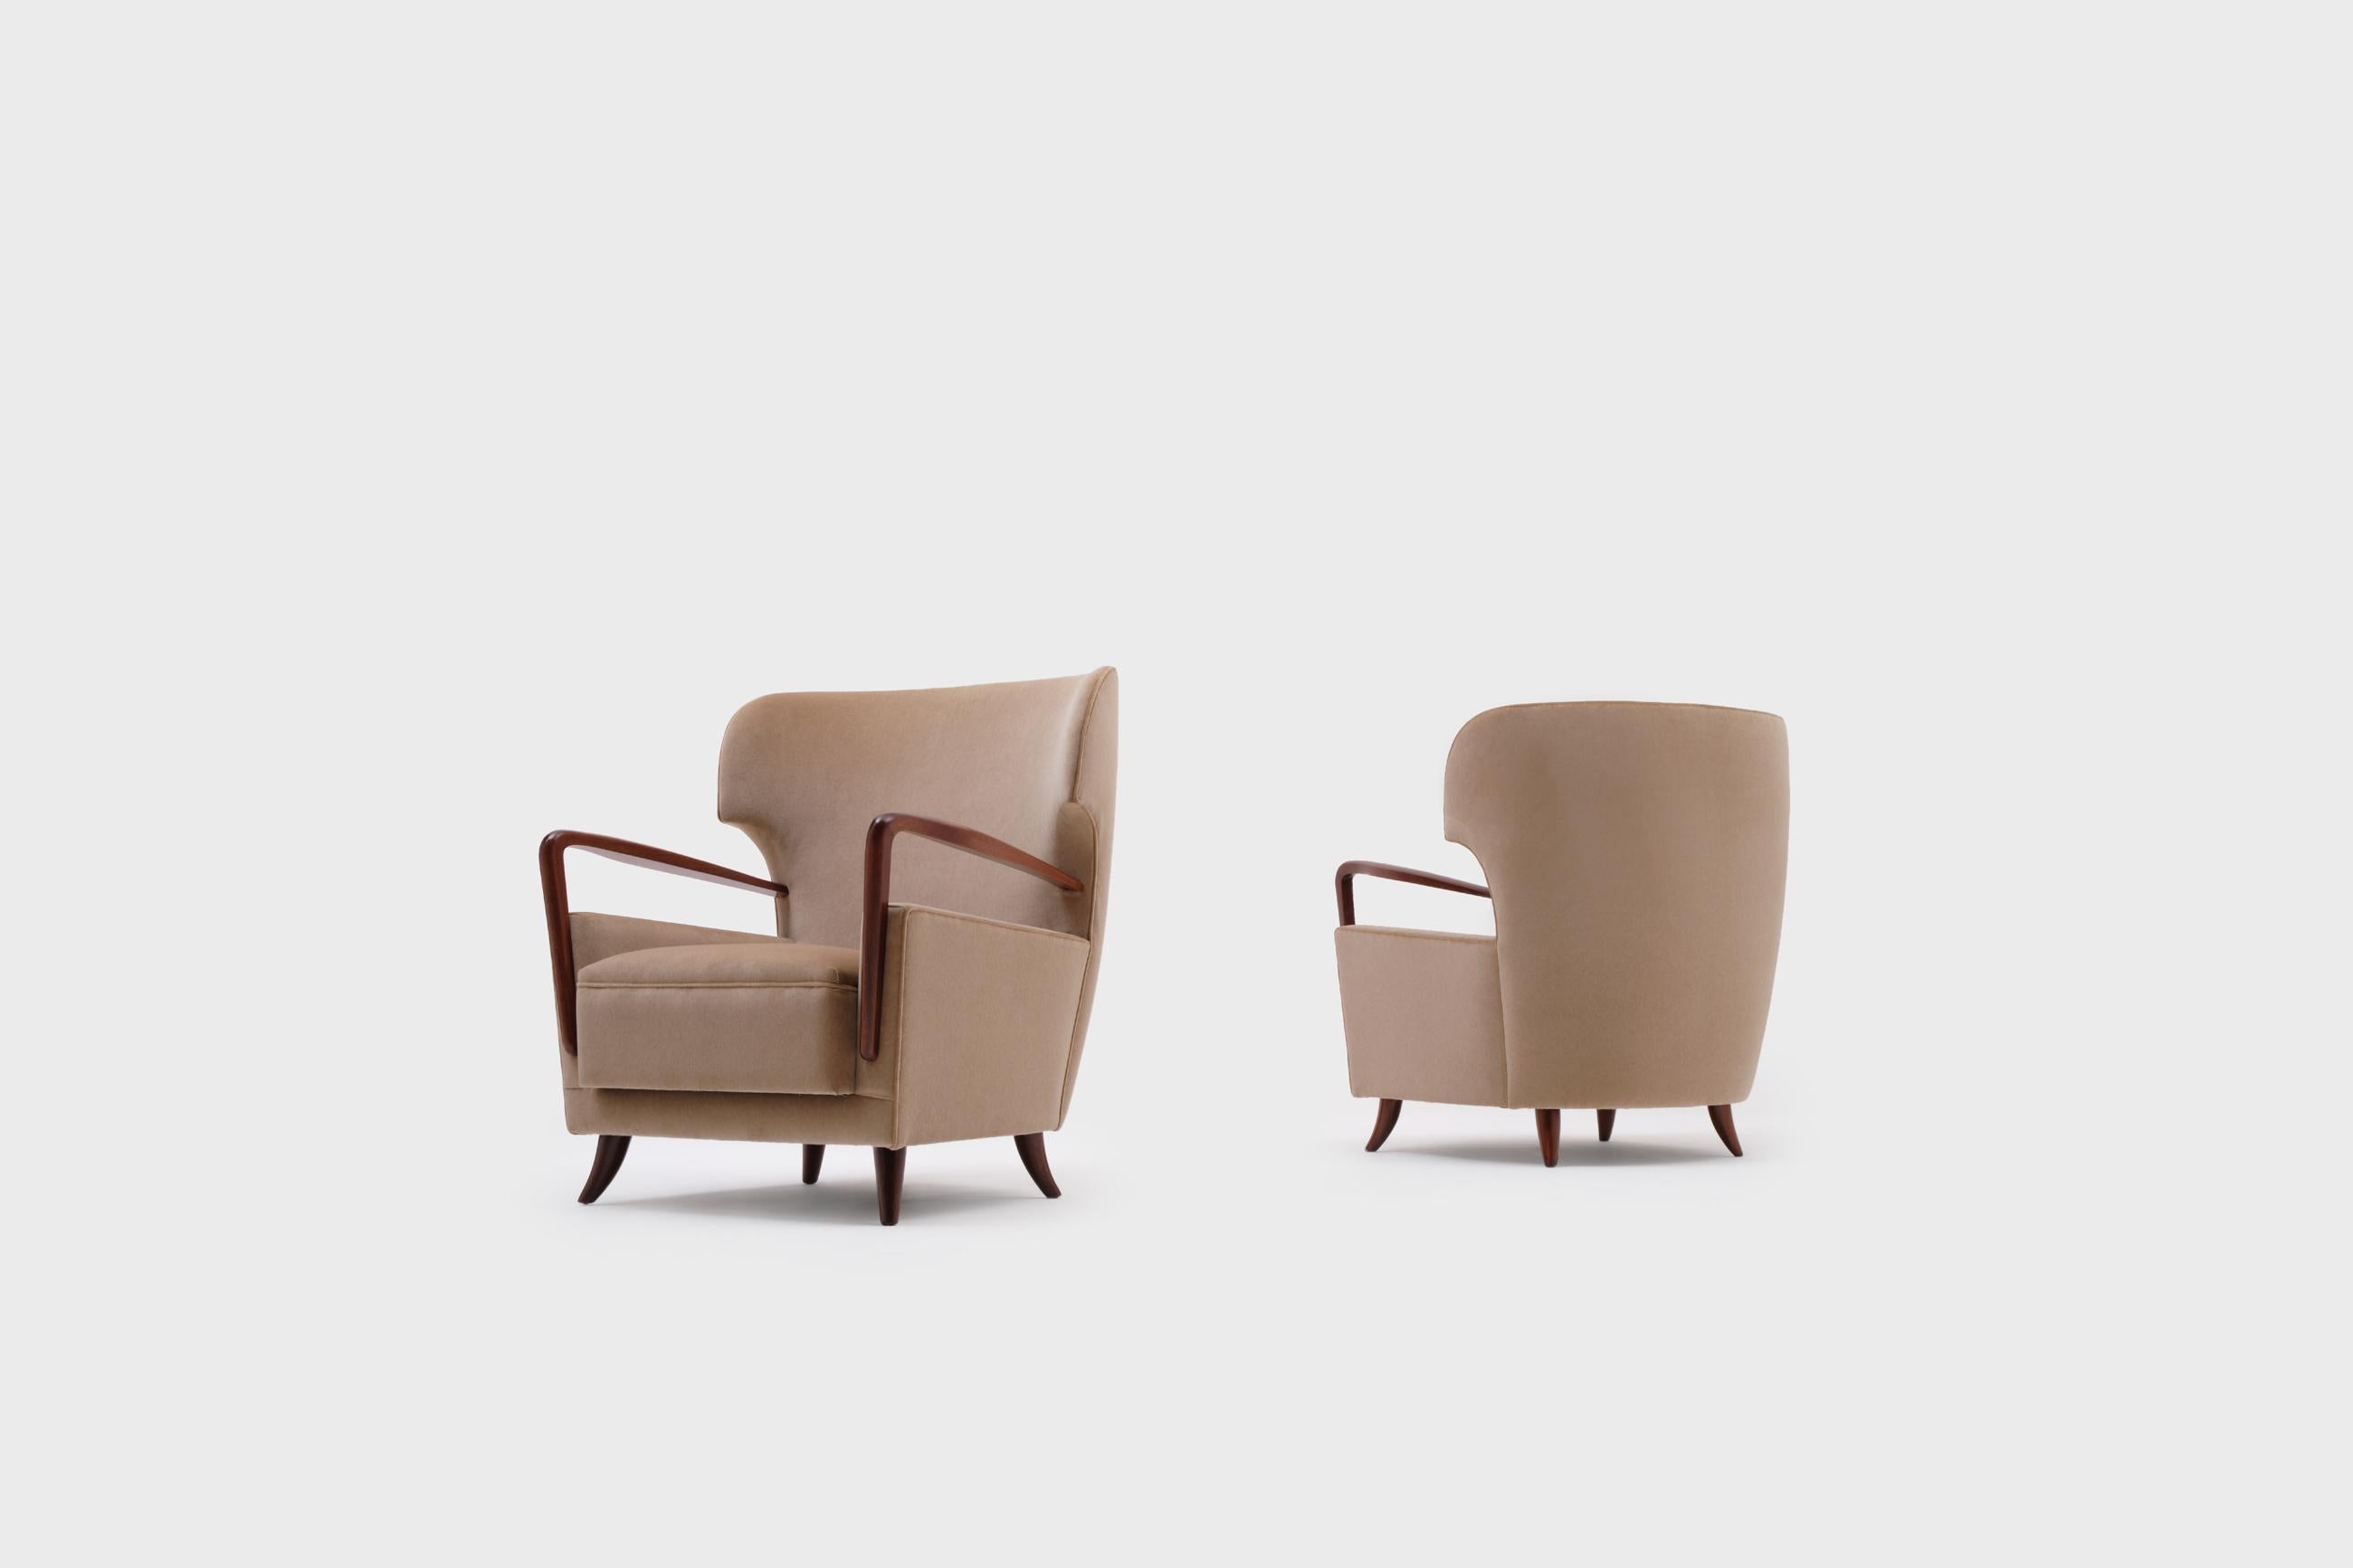 Rare set of wingback armchairs by Melchiorre Bega (1898-1976), Italy, 1950s. Stunning and exceptional design from the highest quality. The sharp wingback and organically carved armrests and feet out of solid mahogany are the signature of this